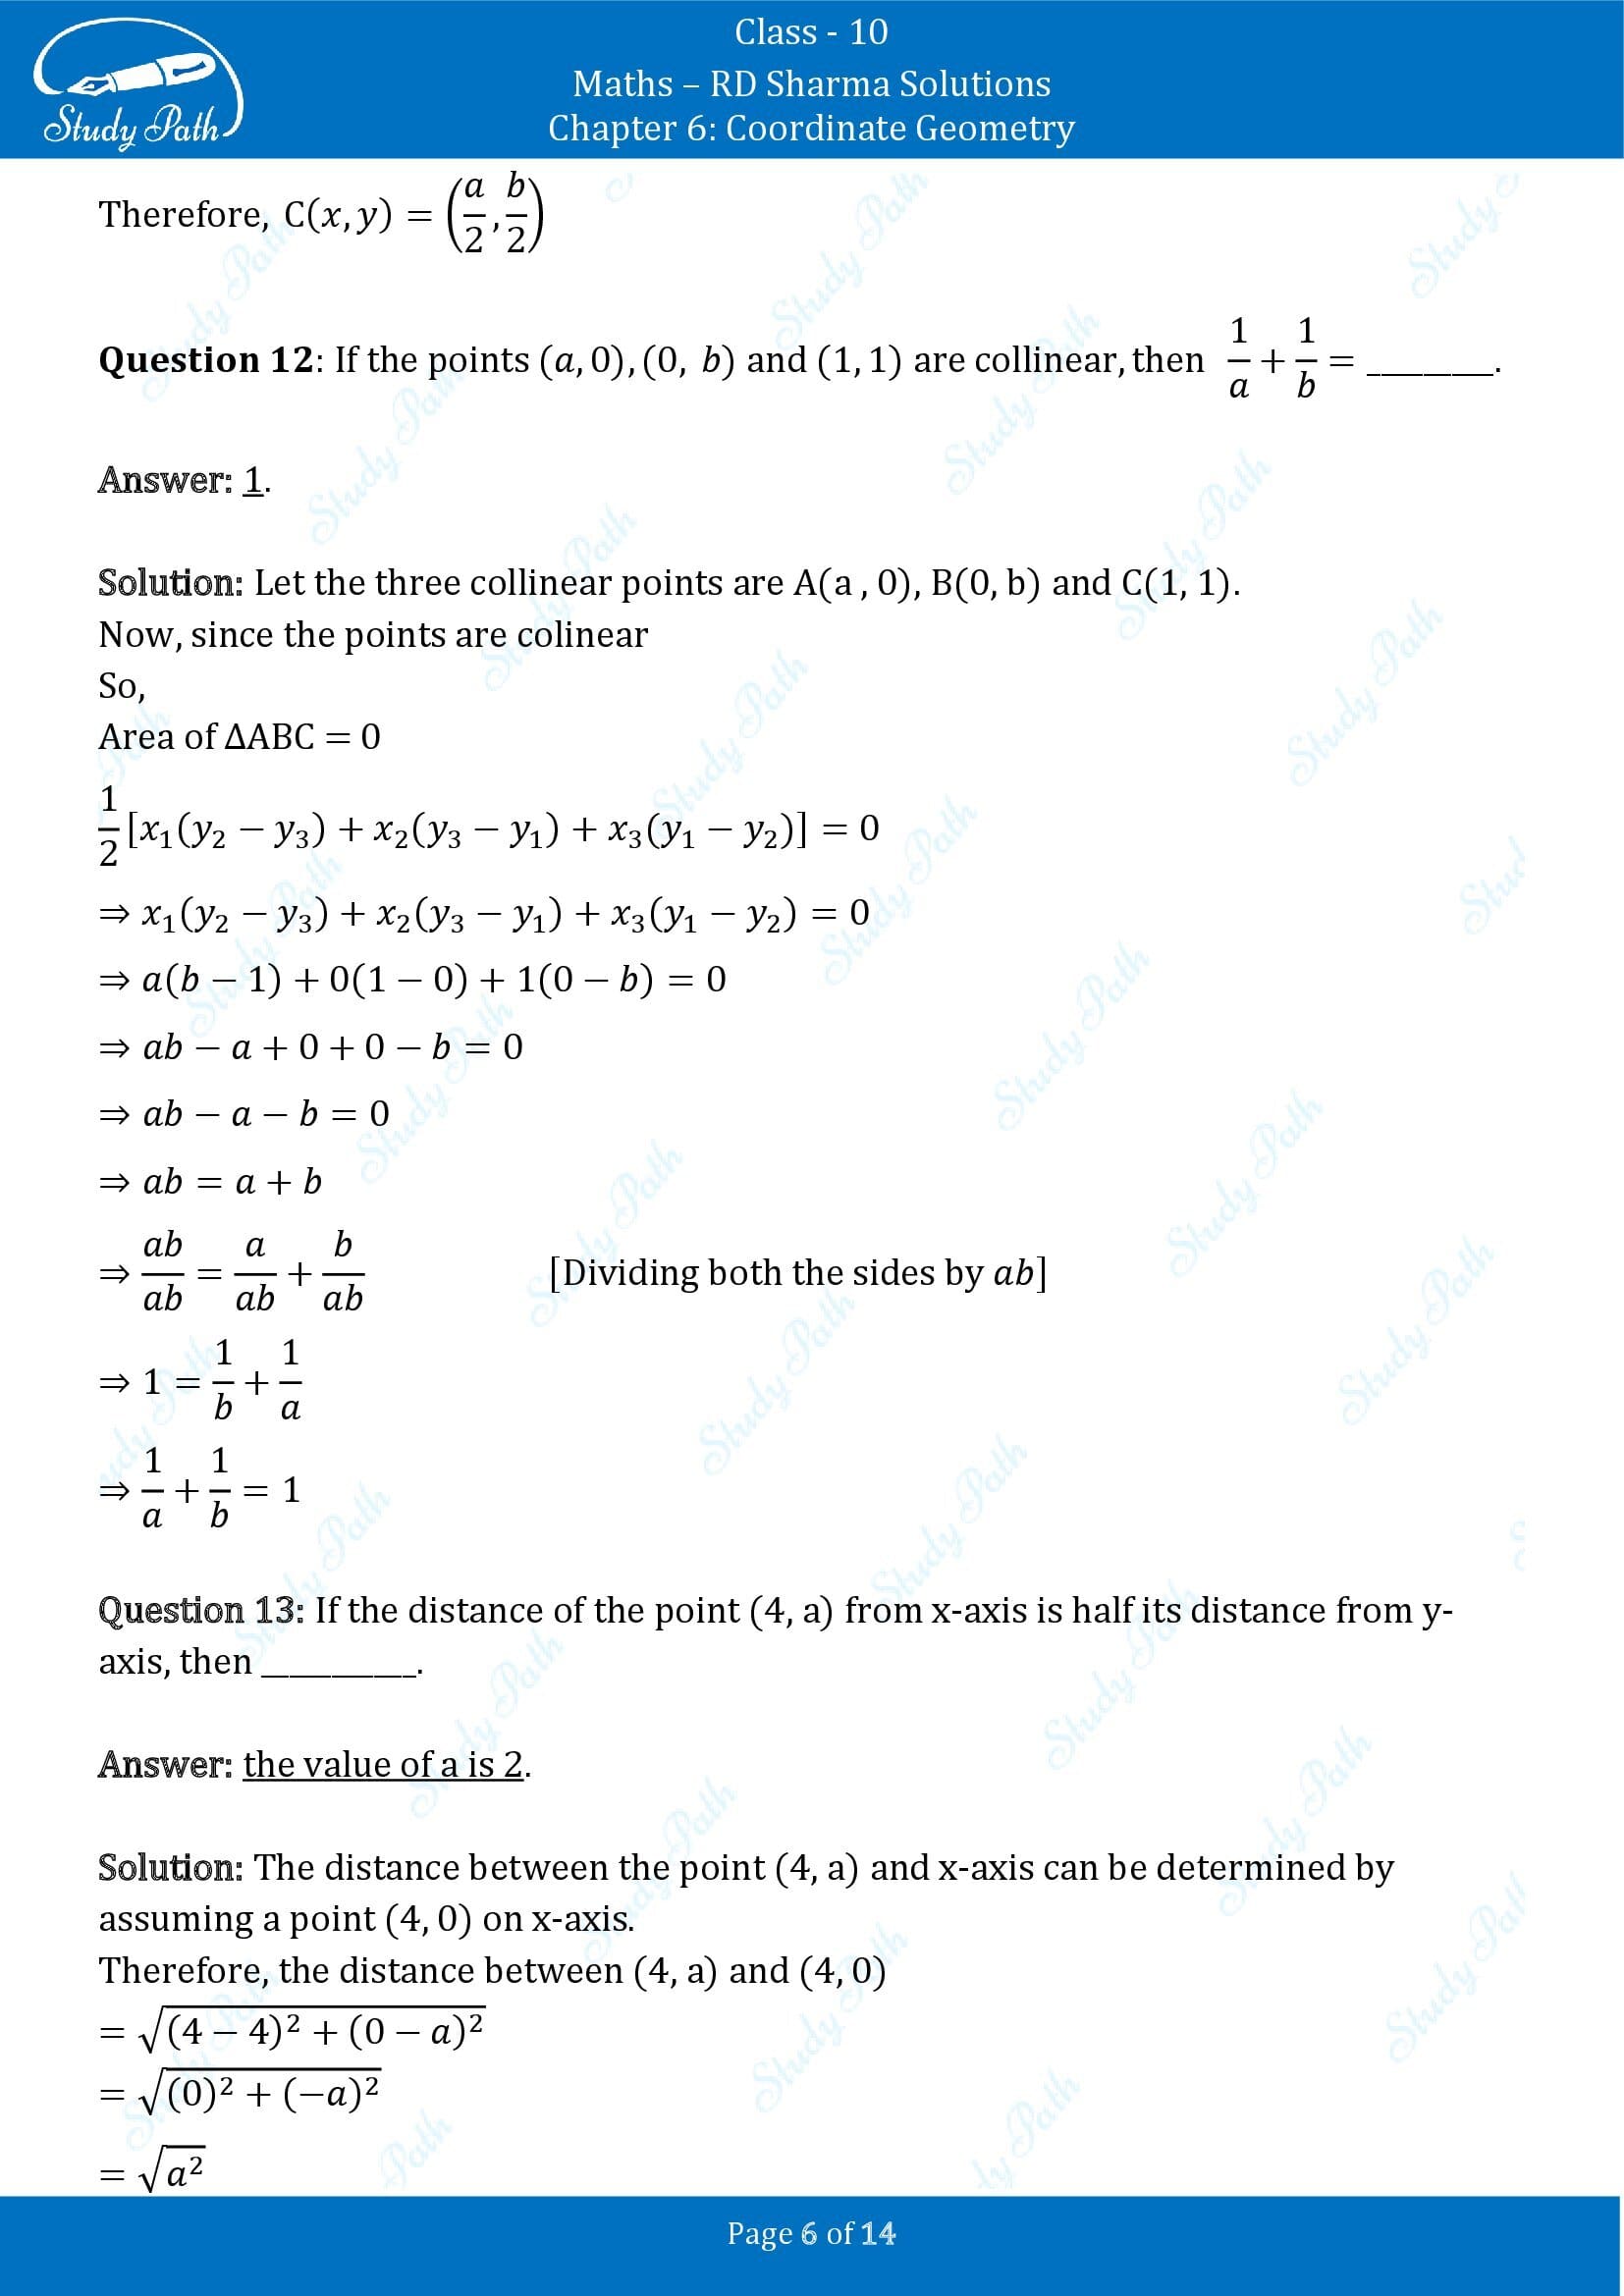 RD Sharma Solutions Class 10 Chapter 6 Coordinate Geometry Fill in the Blank Type Questions FBQs 00006